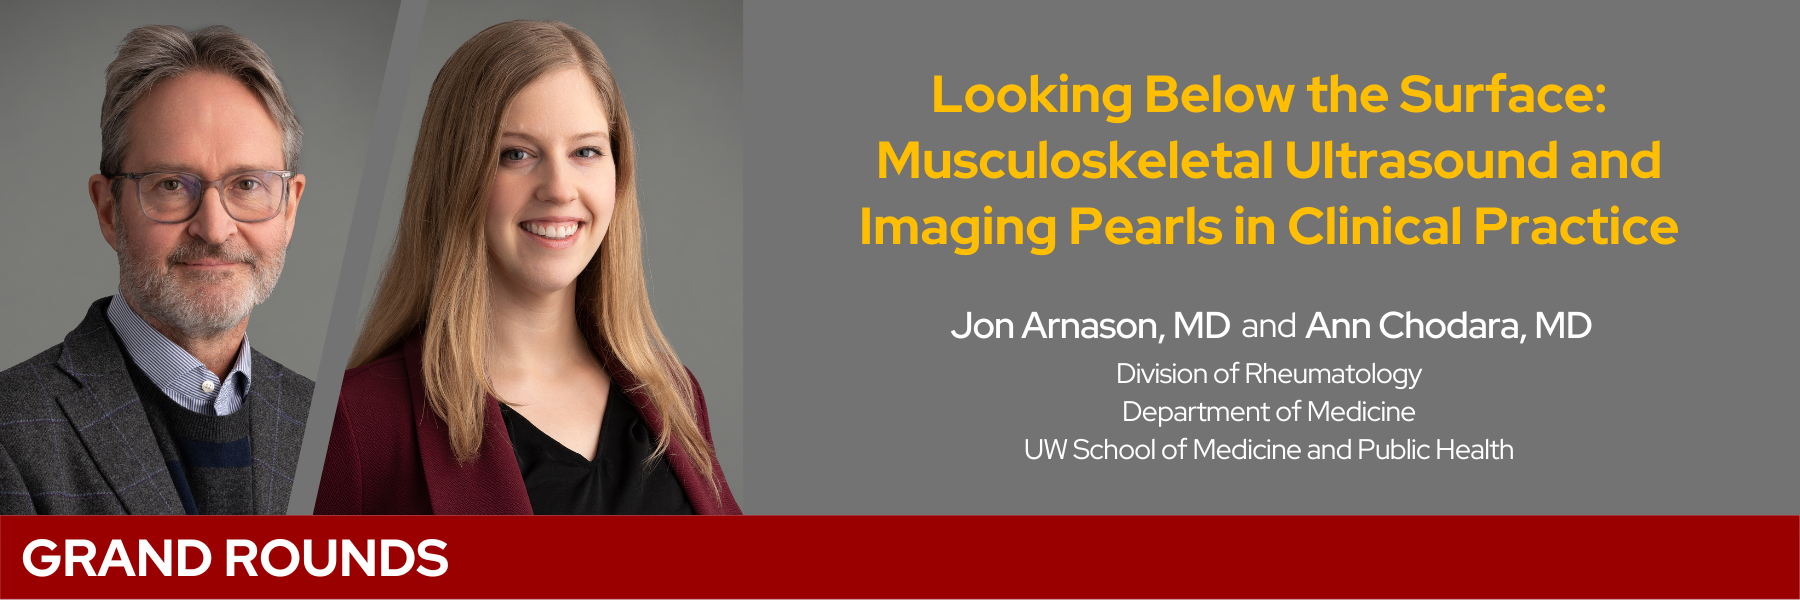 Looking Below the Surface: Musculoskeletal Ultrasound and Imaging Pearls in Clinical Practice